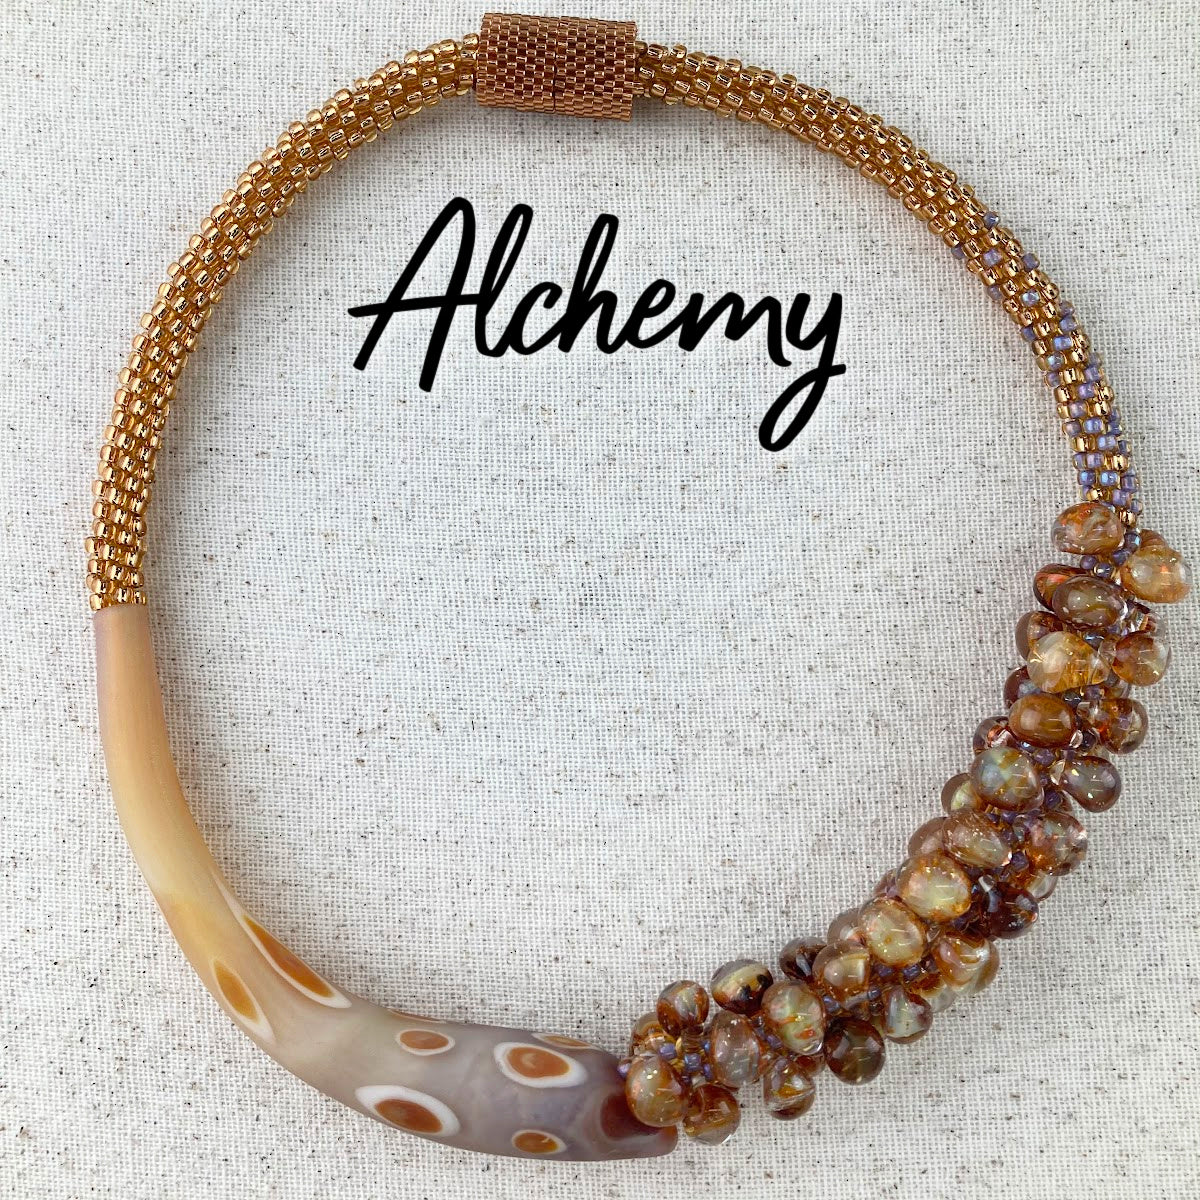 Alchemy beaded kumihimo necklace featuring topaz colored seed beads, Unicorne crescent beads, Unicorne teardrop beads, and peyote stitch endcap covers.